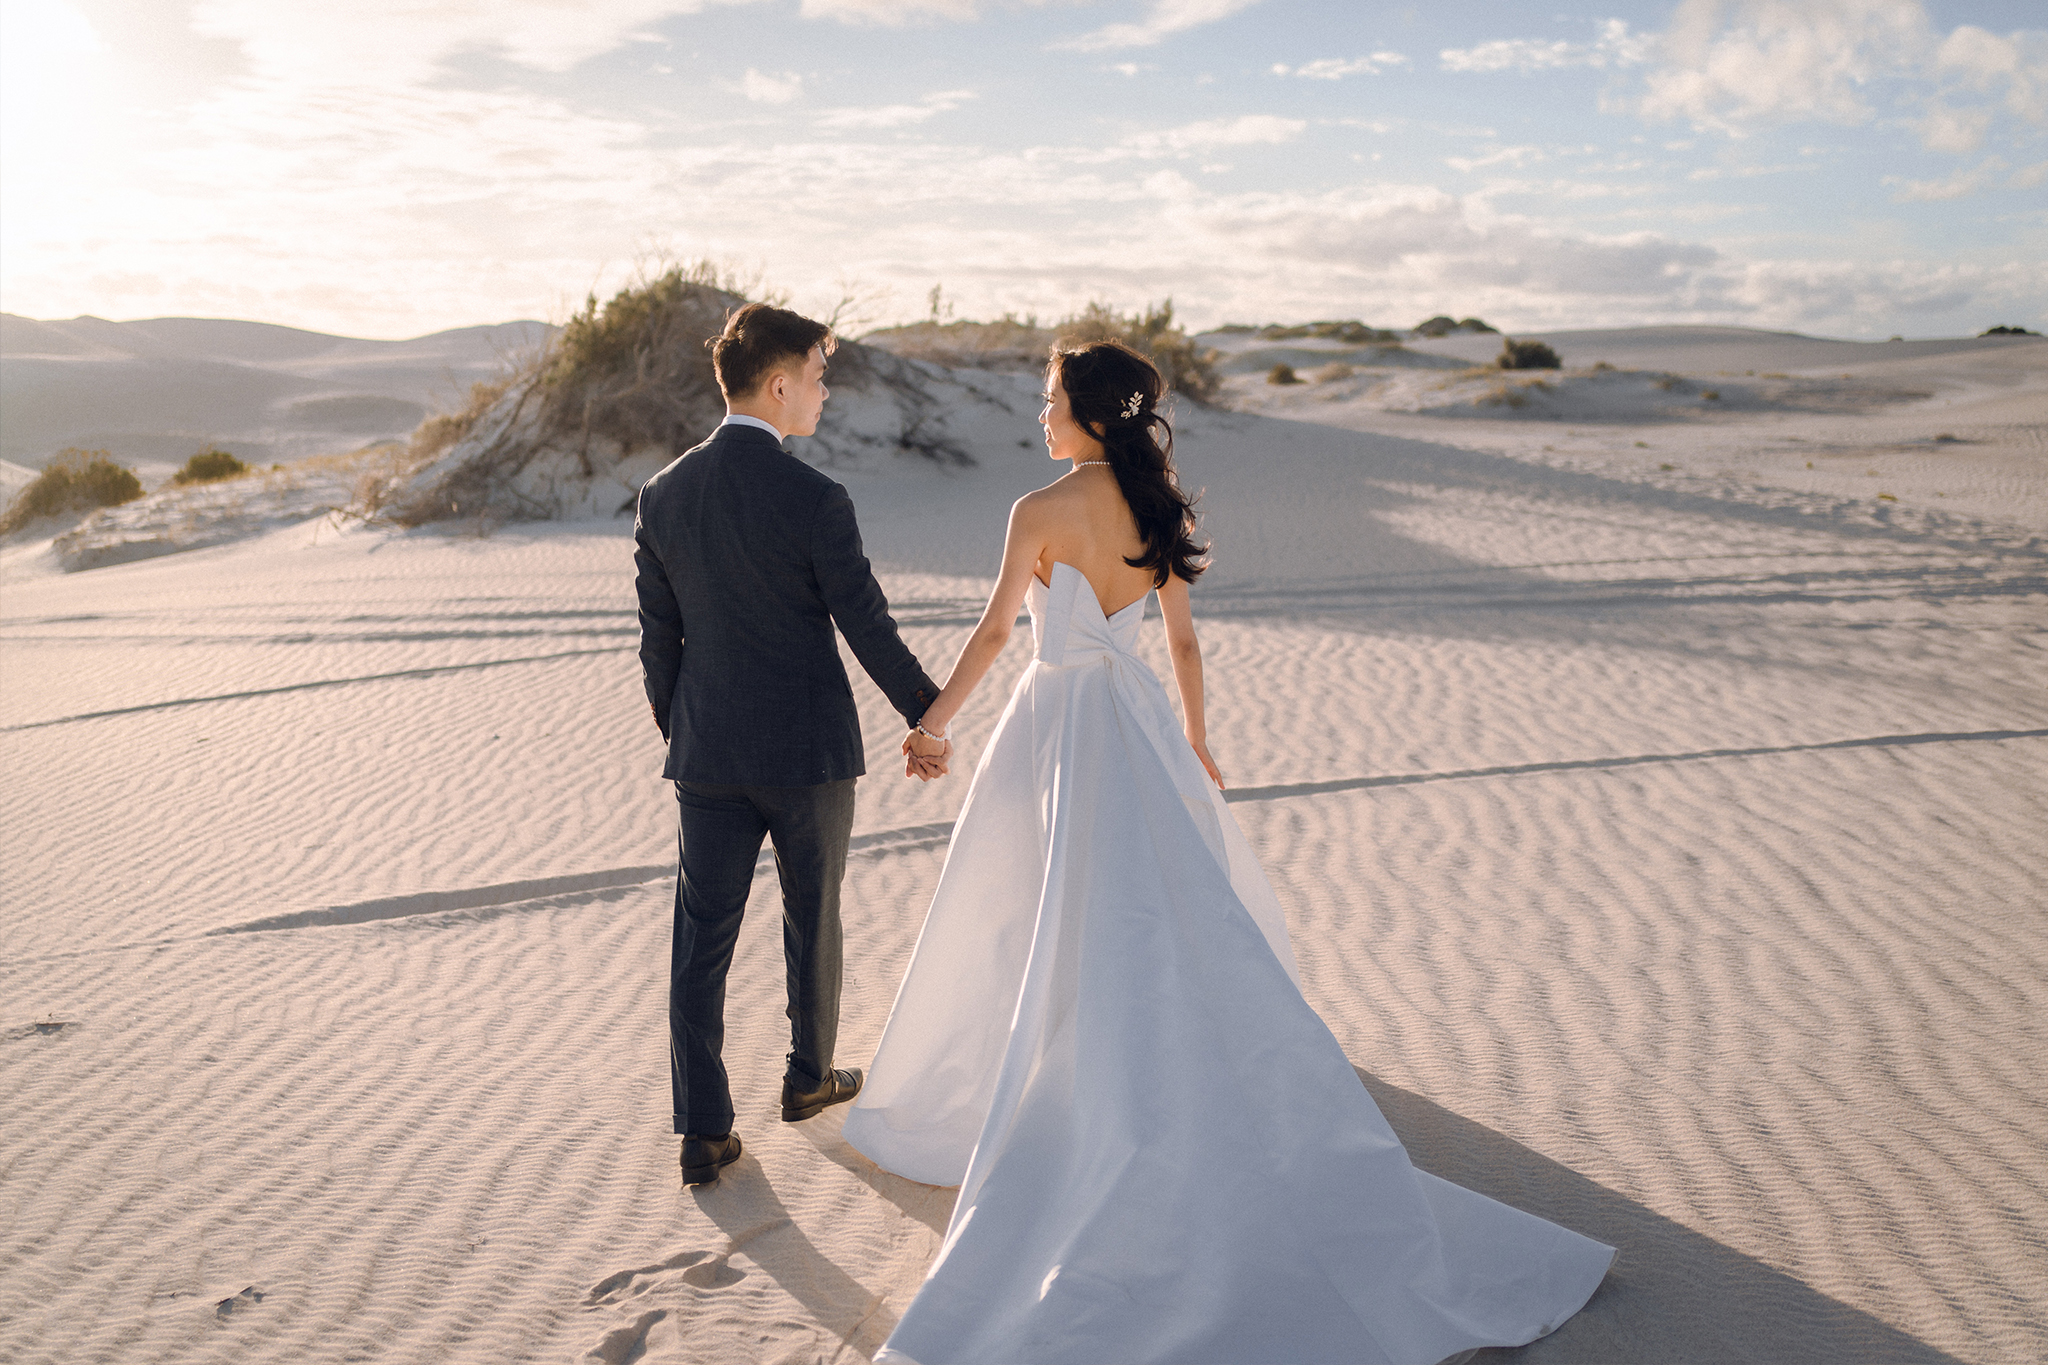 Perth Pre-Wedding Photoshoot at Lancelin Desert & Bells Lookout by Jimmy on OneThreeOneFour 27